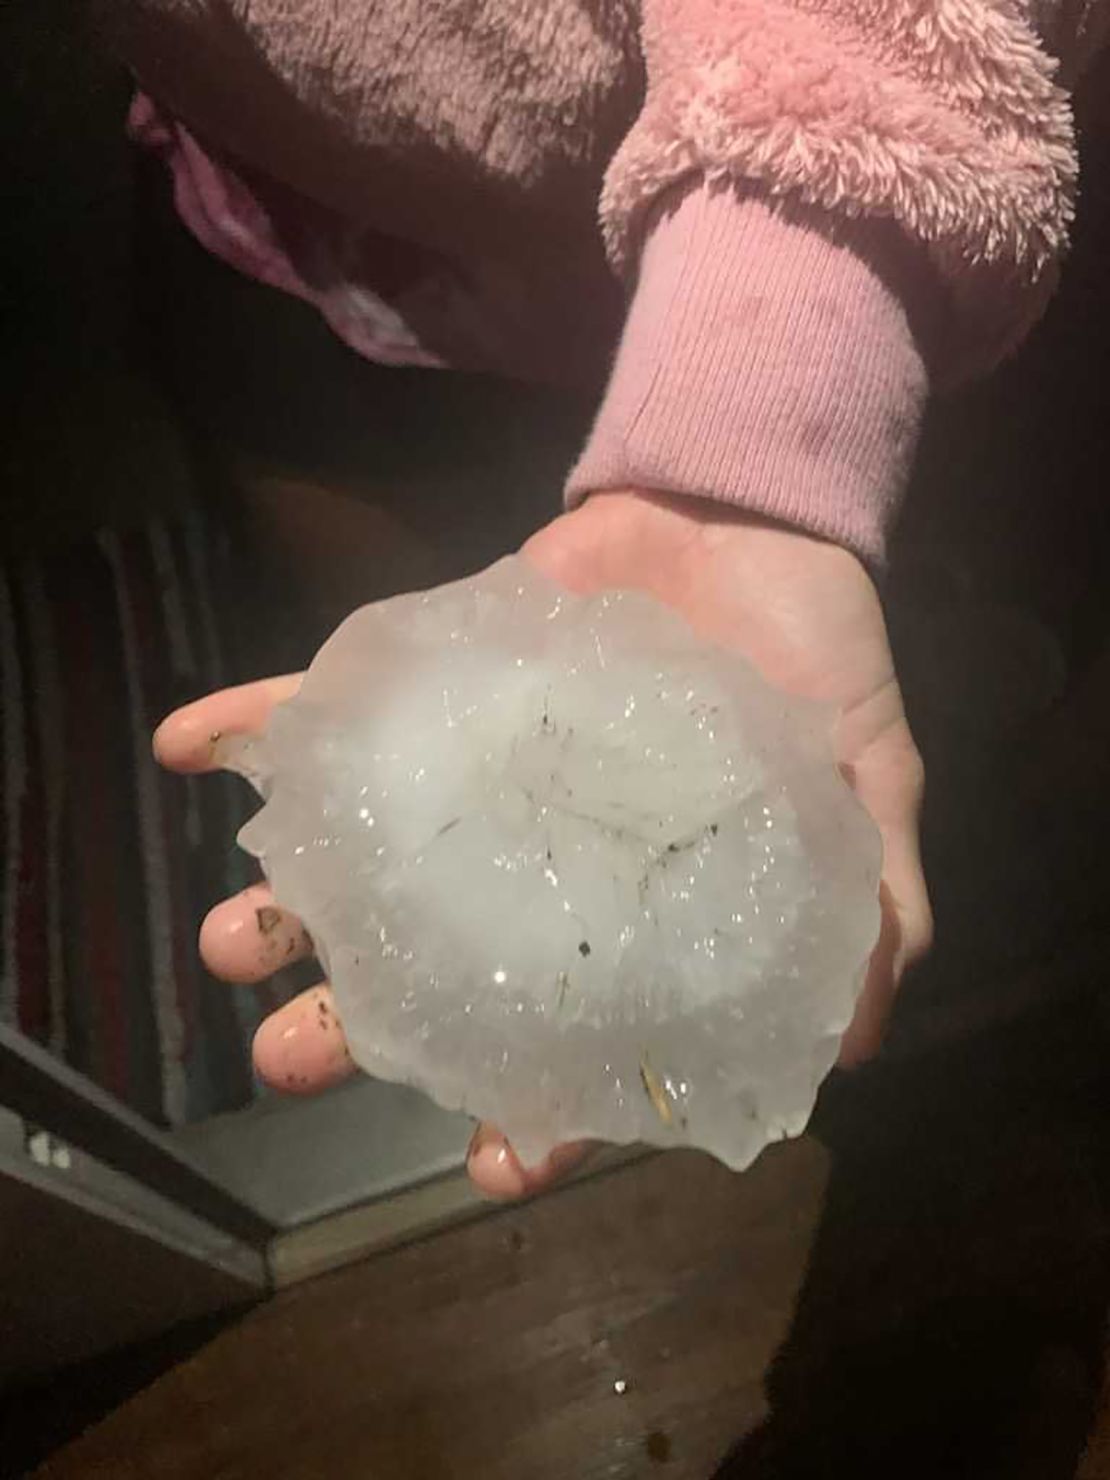 Large hailstones shattered the windows of a house in Hondo, Texas, on Wednesday night, as severe weather impacted the area.